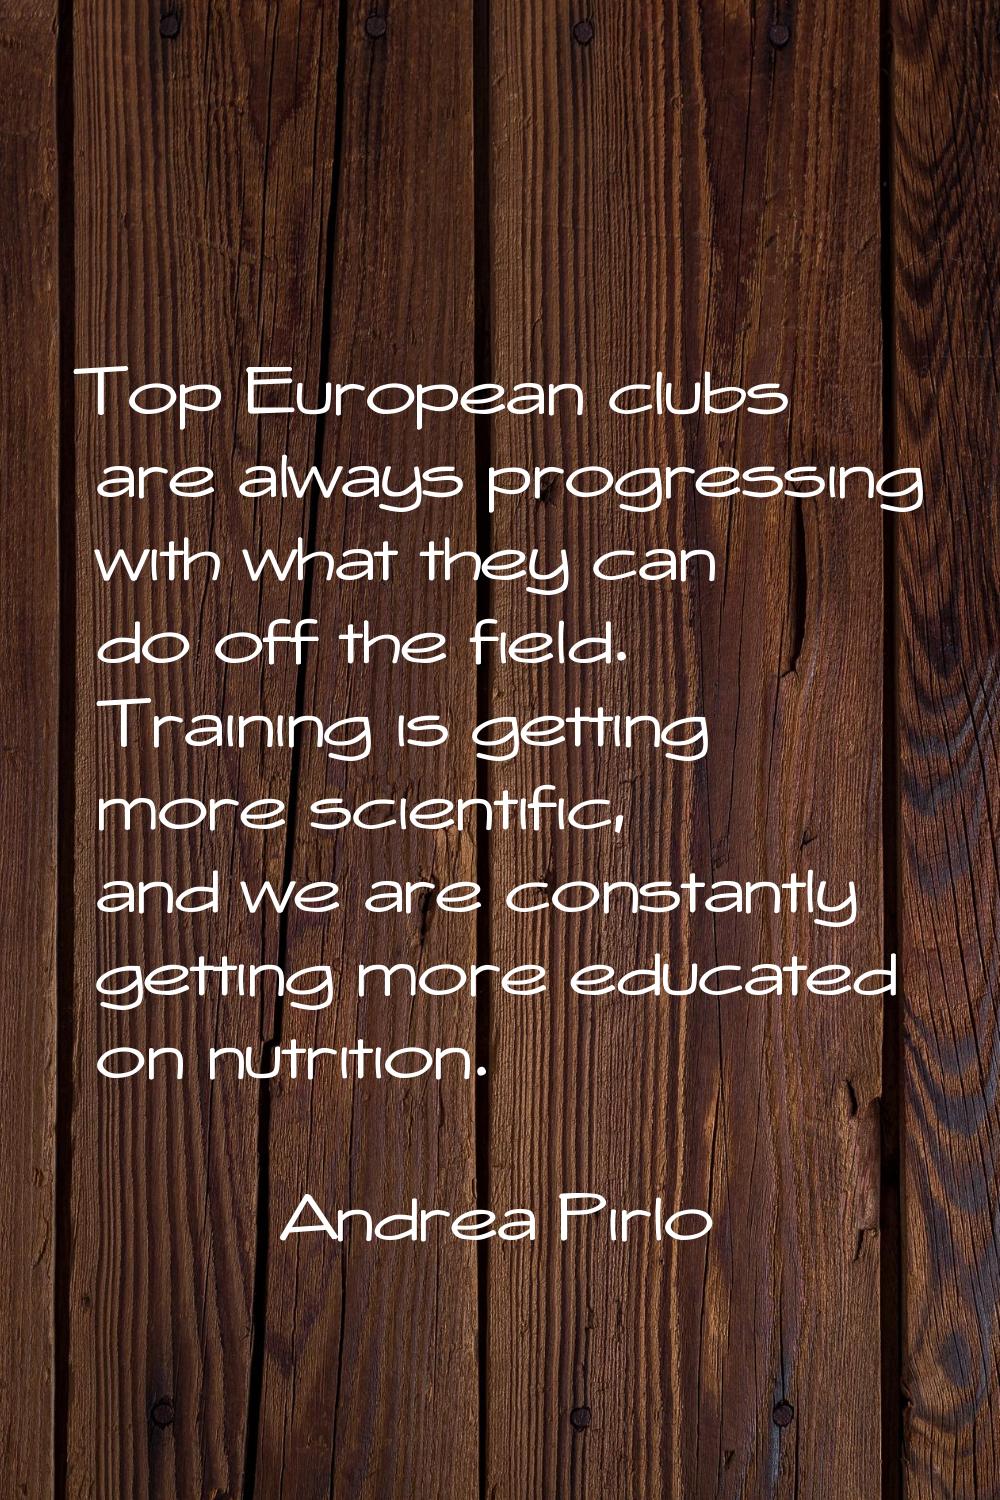 Top European clubs are always progressing with what they can do off the field. Training is getting 